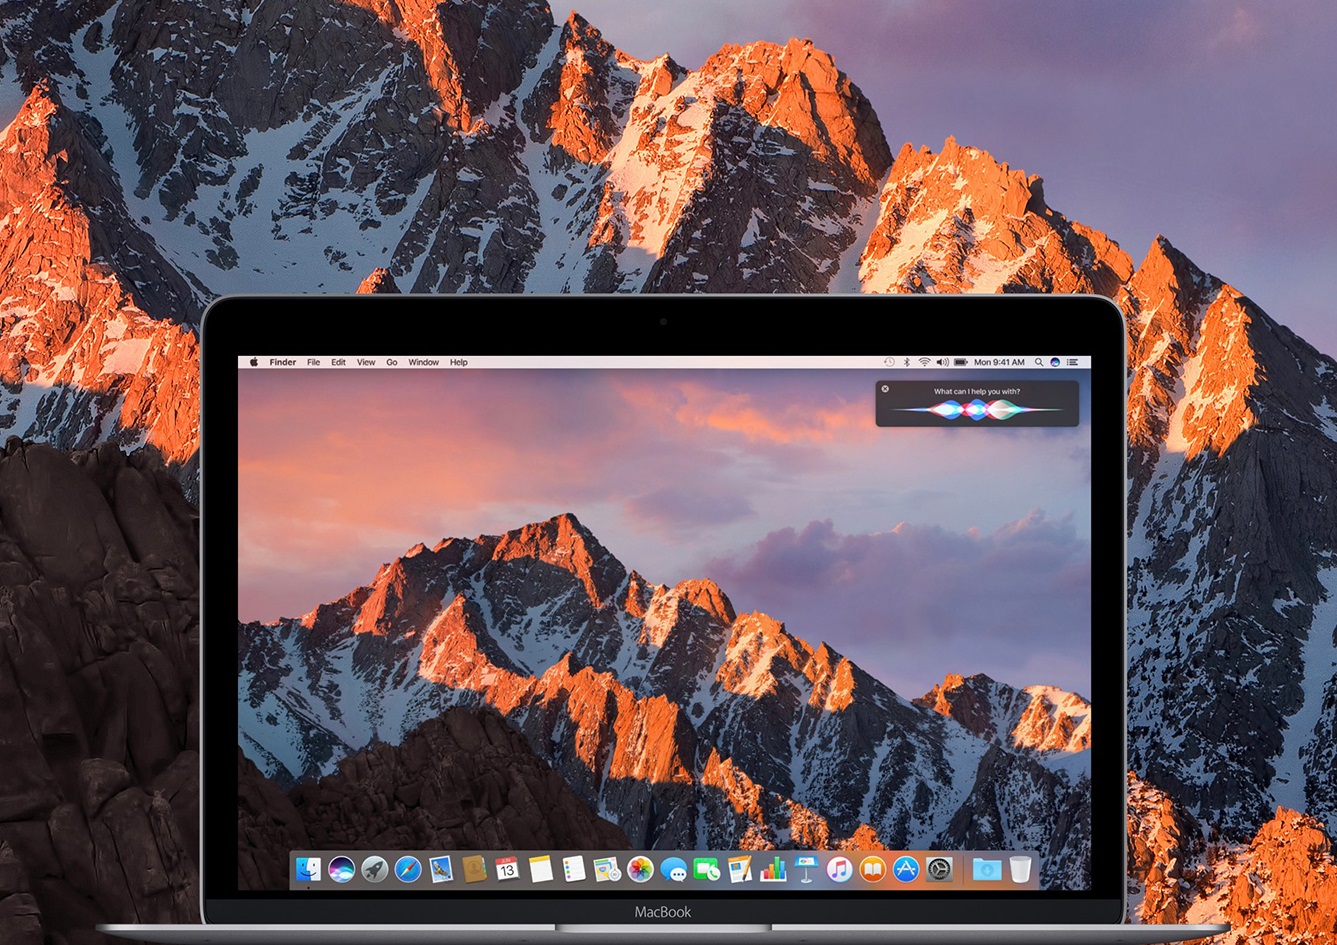 Download motion free for macos high sierra 10 13 6 update can t be installed on this disk